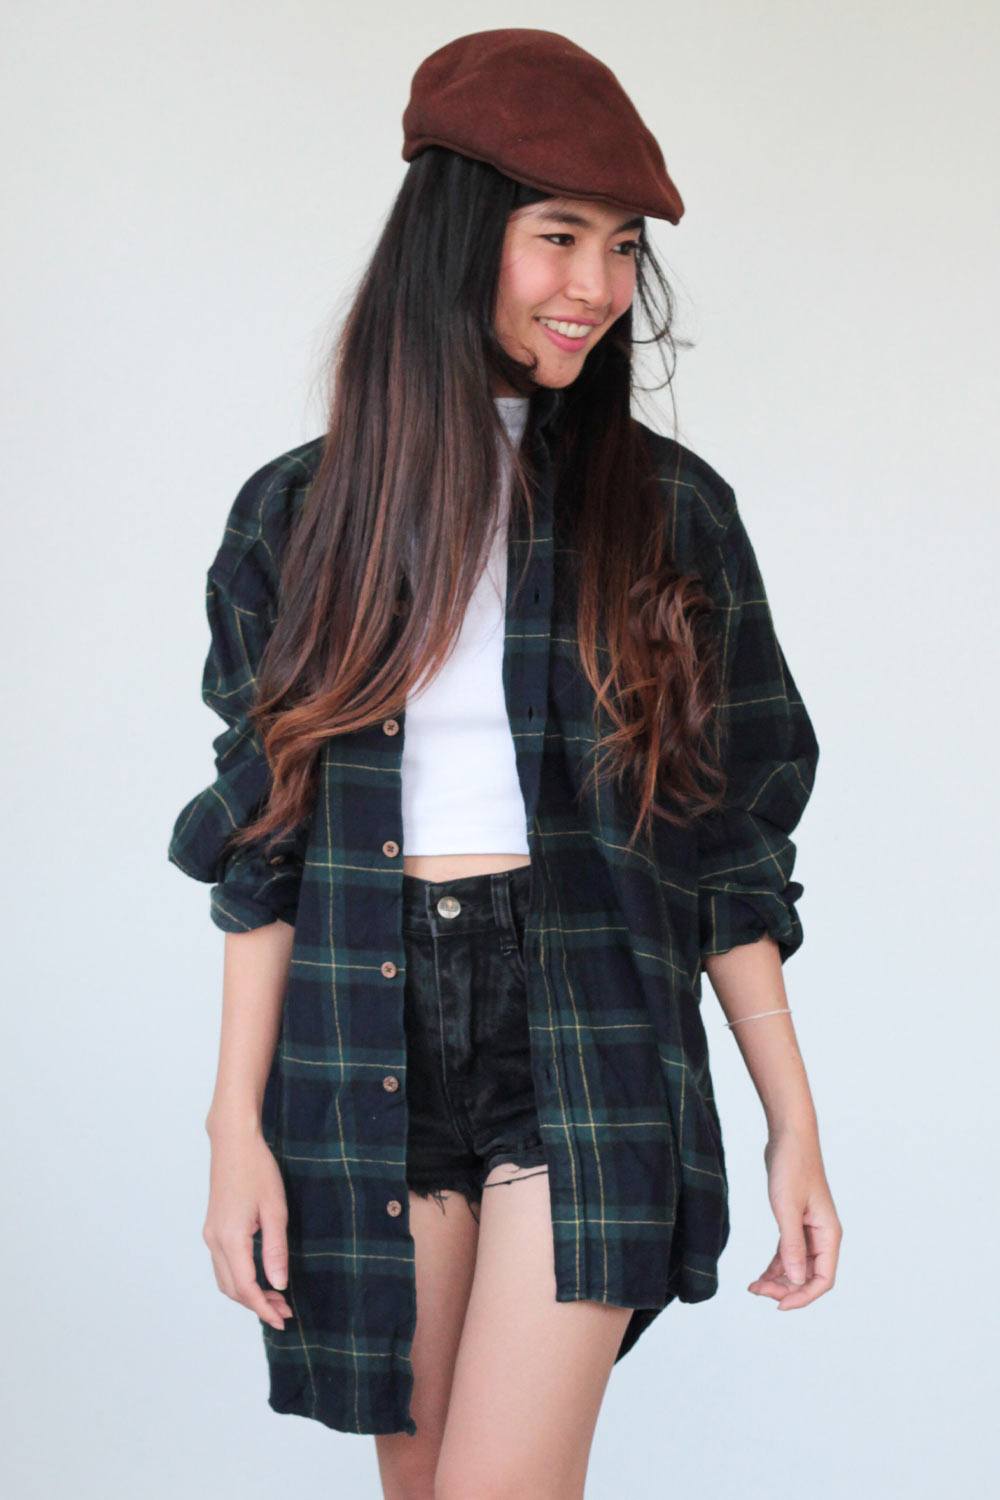 Flannel Shirt and Shorts Outfit Idea